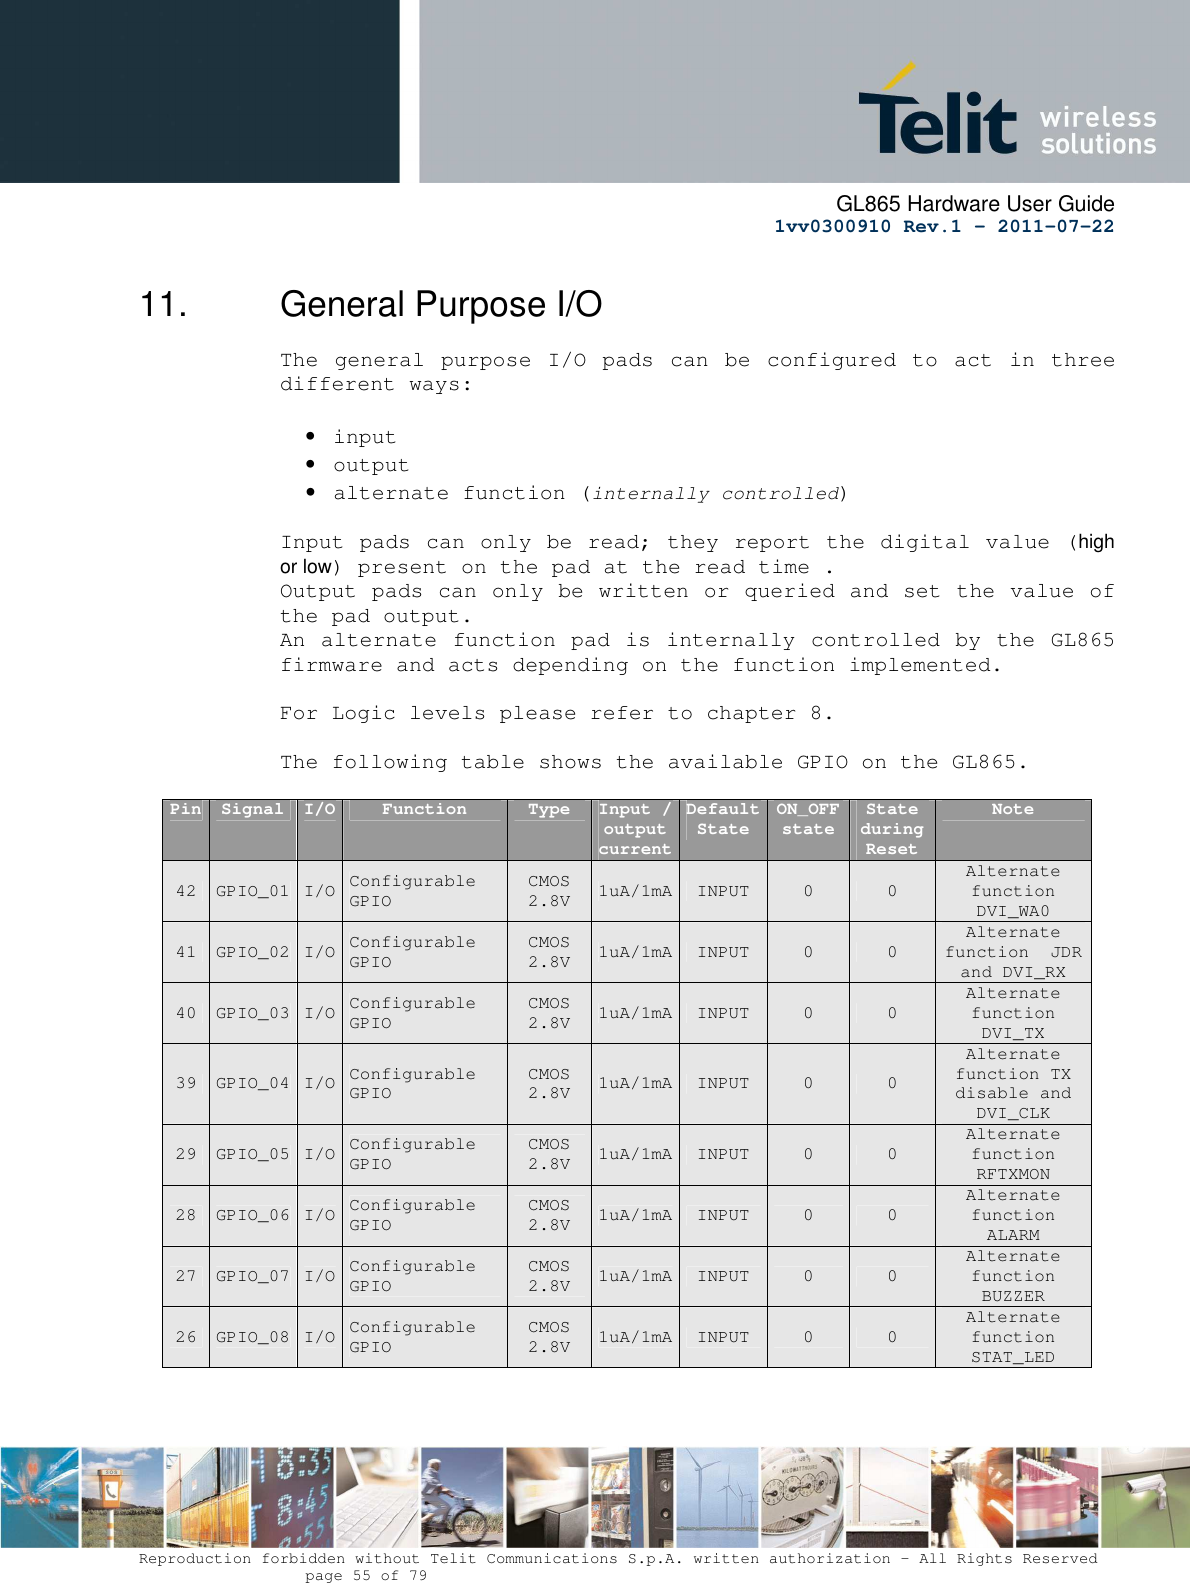      GL865 Hardware User Guide     1vv0300910 Rev.1 – 2011-07-22       Reproduction forbidden without Telit Communications S.p.A. written authorization - All Rights Reserved    page 55 of 79  11.  General Purpose I/O The  general  purpose  I/O  pads  can  be  configured to  act  in  three different ways:  • input • output • alternate function (internally controlled)  Input pads can only be read; they report the digital value (high or low) present on the pad at the read time . Output pads can only be written or queried and set the value of the pad output. An alternate function pad is internally controlled by the GL865 firmware and acts depending on the function implemented.    For Logic levels please refer to chapter 8.  The following table shows the available GPIO on the GL865.  Pin Signal I/O Function Type Input / output current Default State ON_OFF state State during Reset Note 42  GPIO_01 I/O Configurable GPIO CMOS 2.8V  1uA/1mA INPUT  0  0 Alternate function DVI_WA0   41  GPIO_02 I/O Configurable GPIO CMOS 2.8V  1uA/1mA INPUT  0  0 Alternate function  JDR and DVI_RX   40  GPIO_03 I/O Configurable GPIO CMOS 2.8V  1uA/1mA INPUT  0  0 Alternate function  DVI_TX   39  GPIO_04 I/O Configurable GPIO CMOS 2.8V  1uA/1mA INPUT  0  0 Alternate function TX disable and DVI_CLK   29  GPIO_05 I/O Configurable GPIO CMOS 2.8V  1uA/1mA INPUT  0  0 Alternate function RFTXMON 28  GPIO_06 I/O Configurable GPIO CMOS 2.8V  1uA/1mA INPUT  0  0 Alternate function ALARM 27  GPIO_07 I/O Configurable GPIO CMOS 2.8V  1uA/1mA INPUT  0  0 Alternate function BUZZER 26  GPIO_08 I/O Configurable GPIO CMOS 2.8V  1uA/1mA INPUT  0  0 Alternate function  STAT_LED      